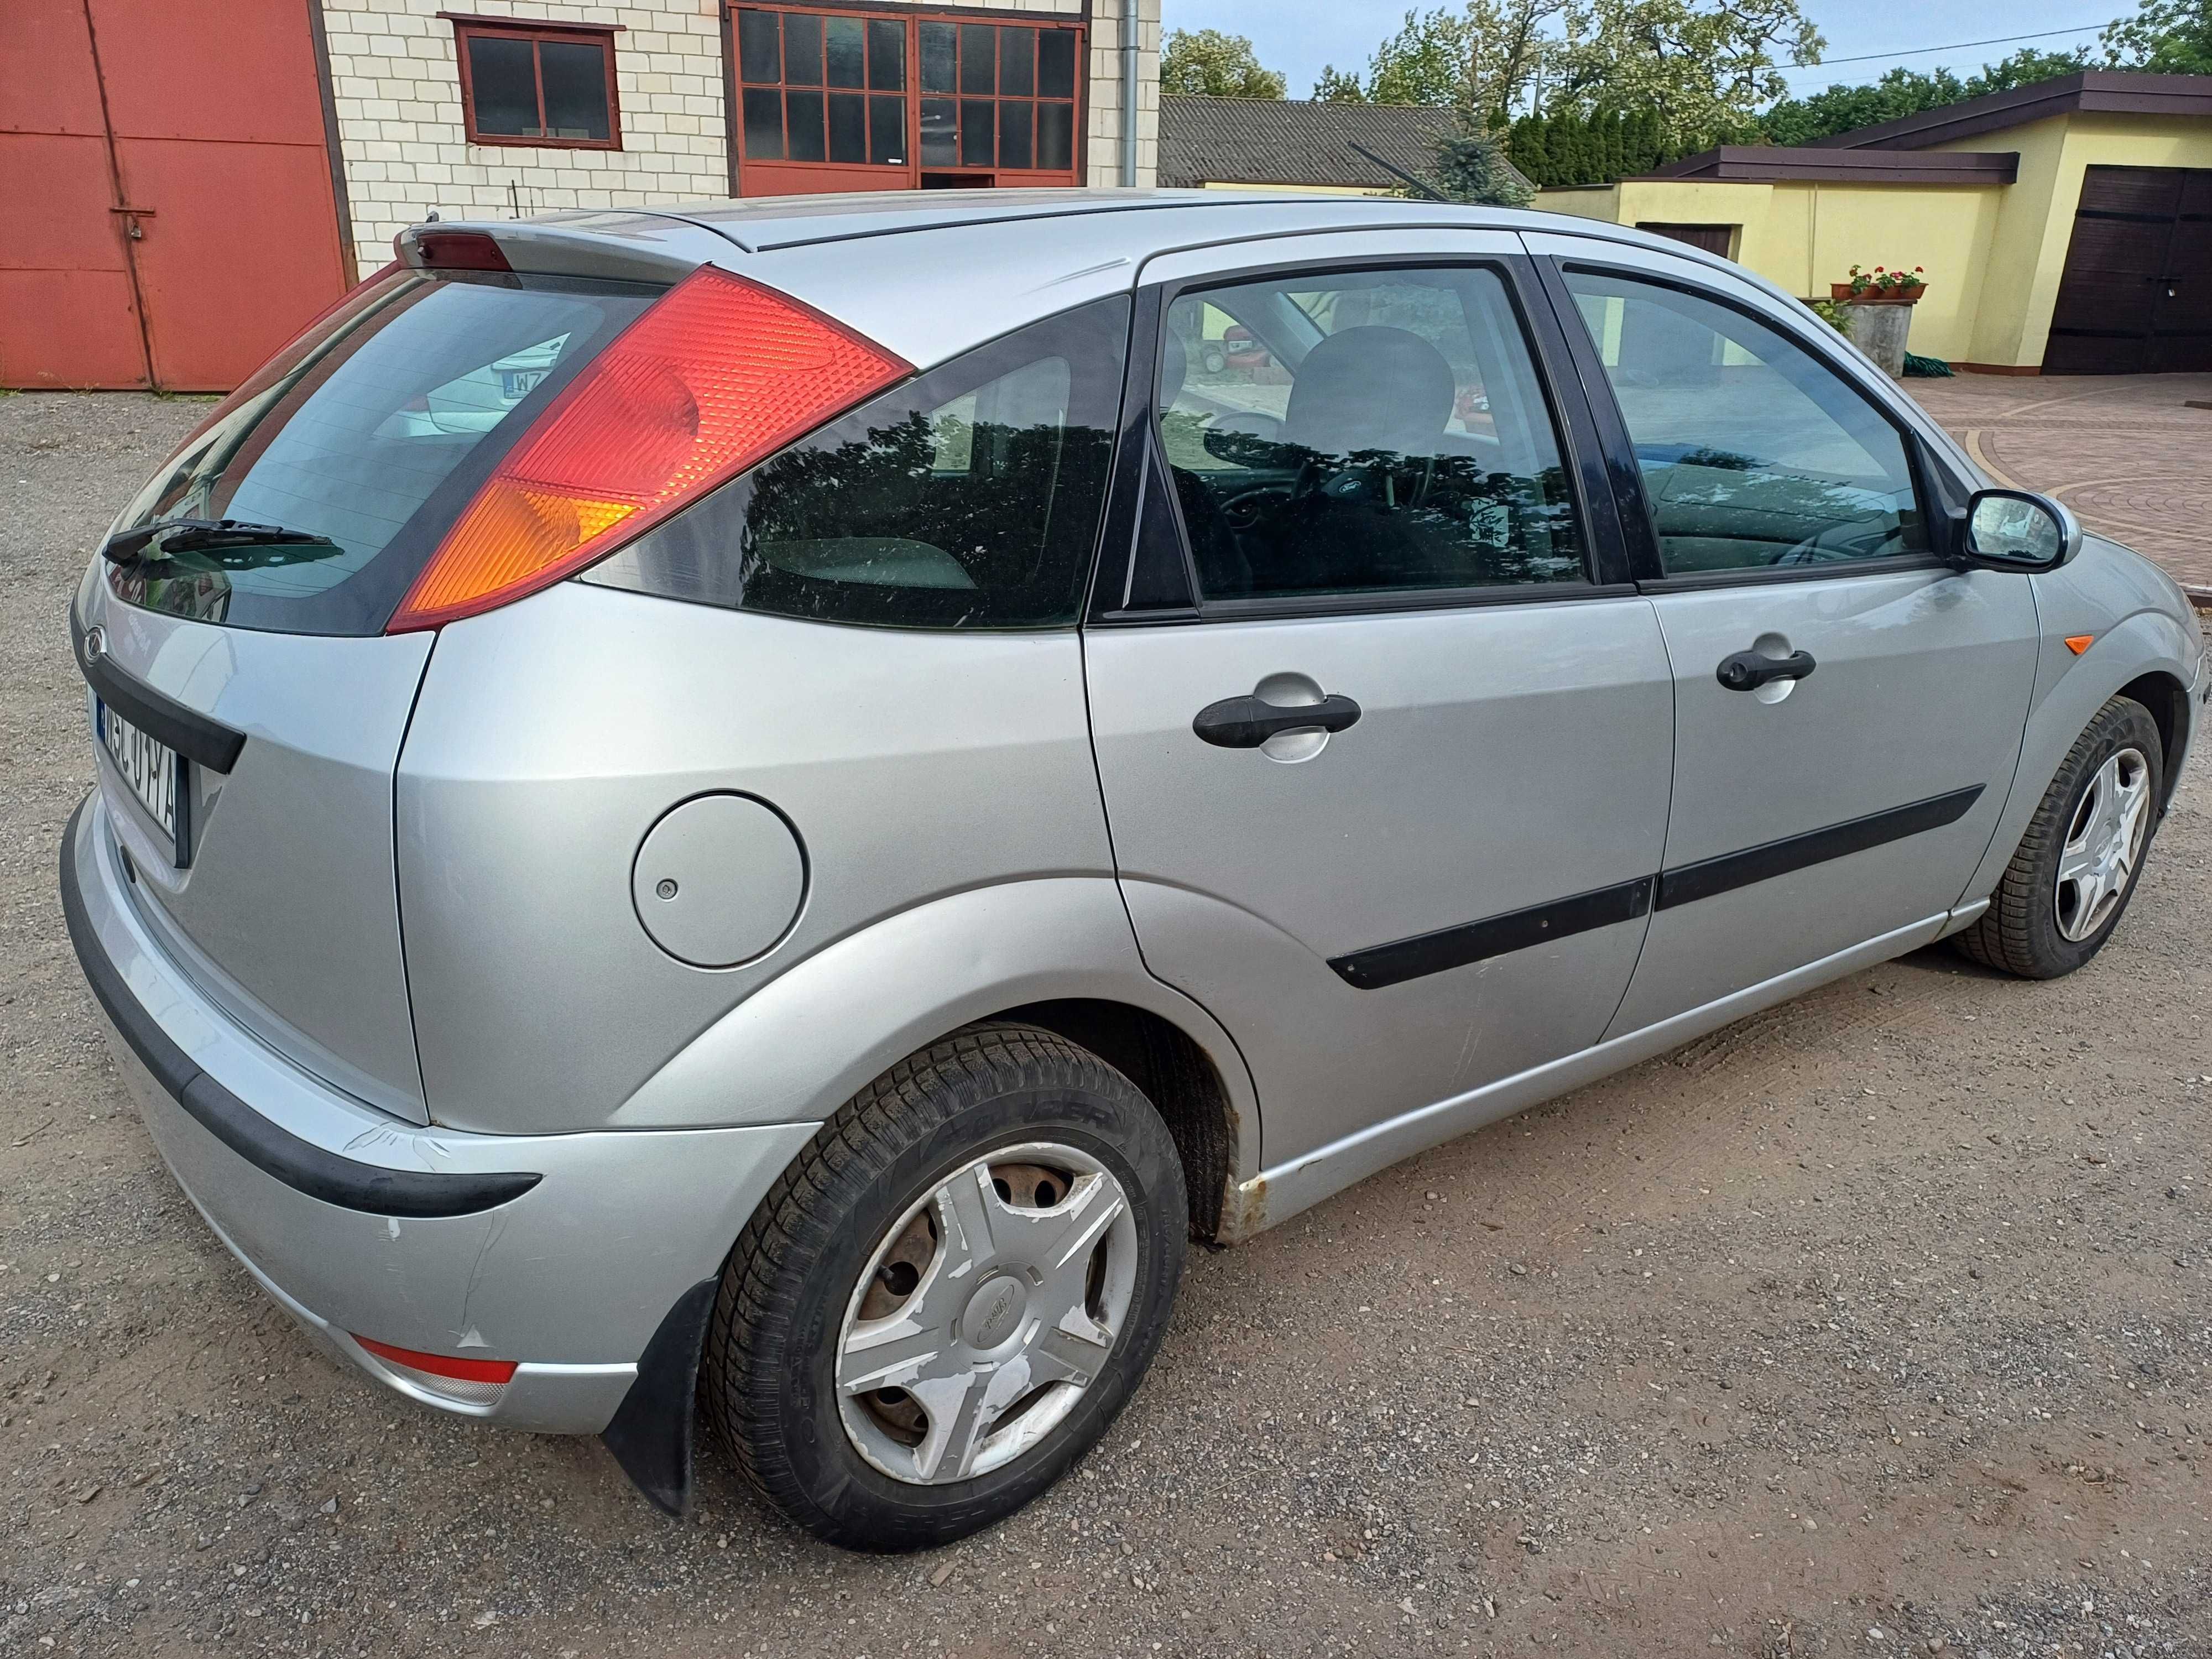 Ford Focus 2001 1,6 benzyna